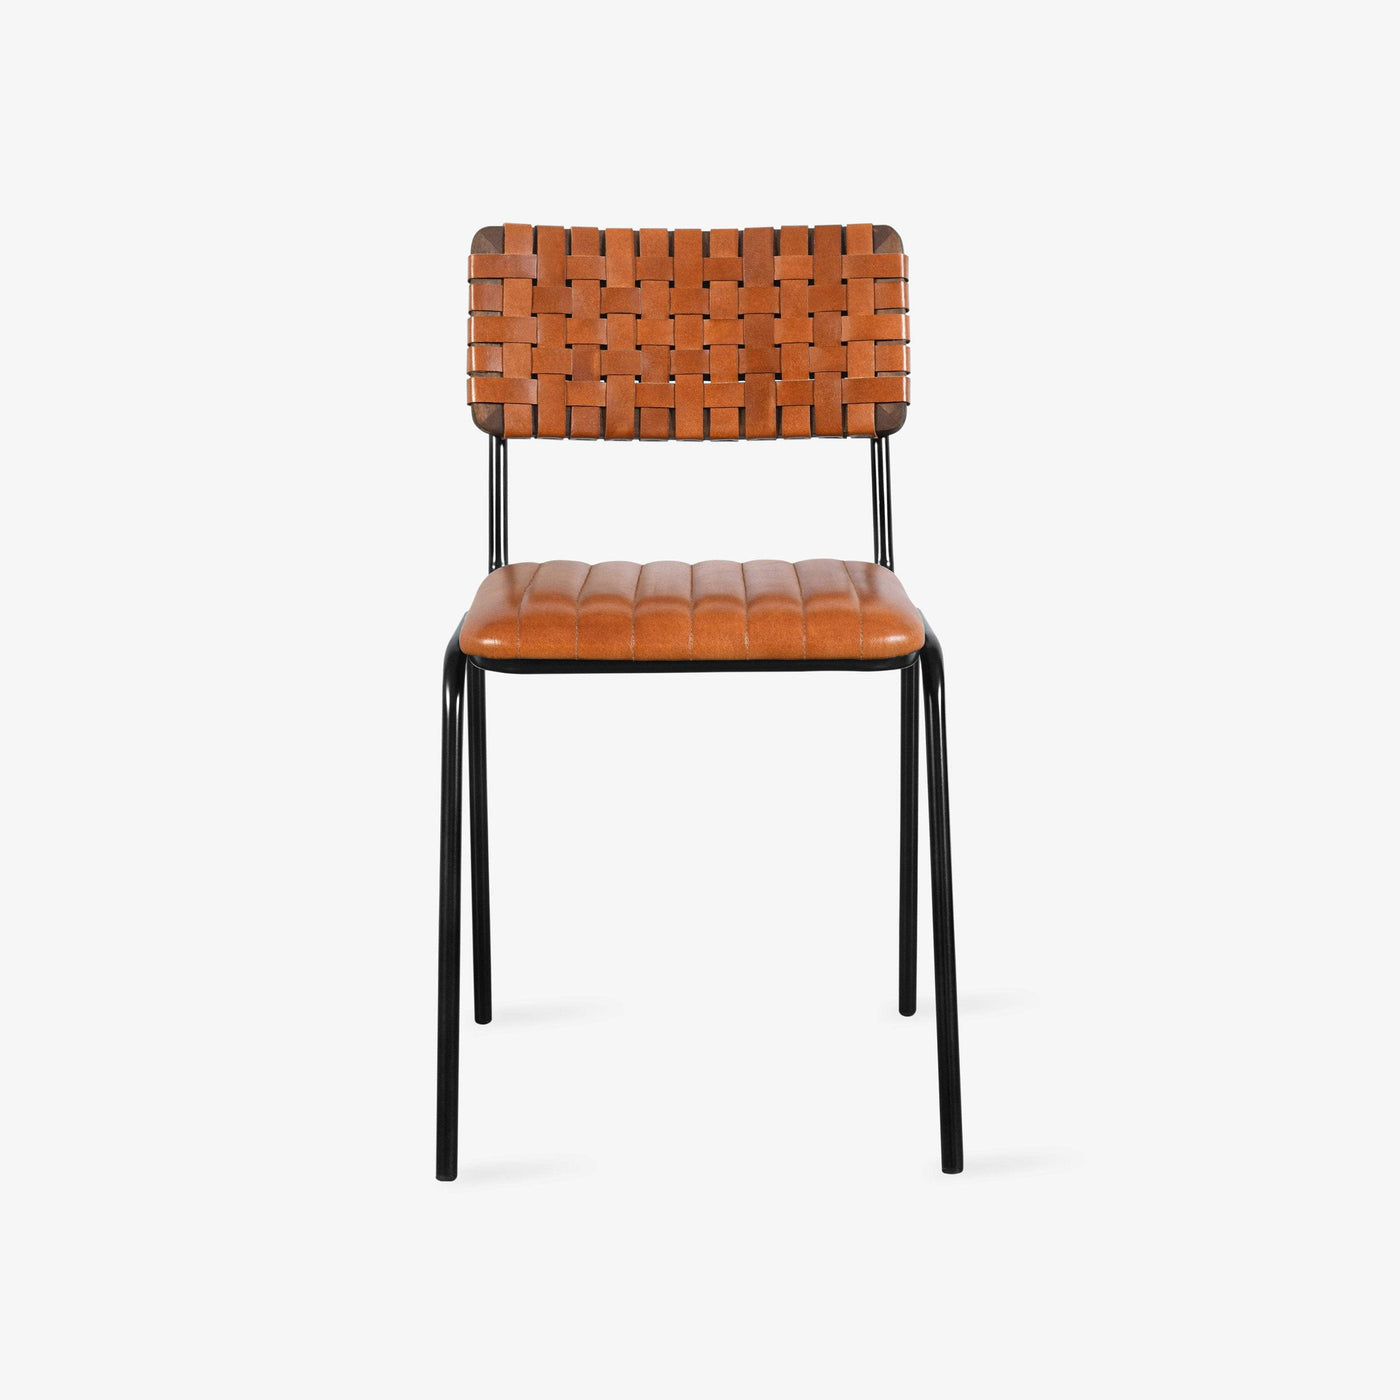 Algar Woven Leather Dining Chair, Tan Dining Chairs & Benches sazy.com